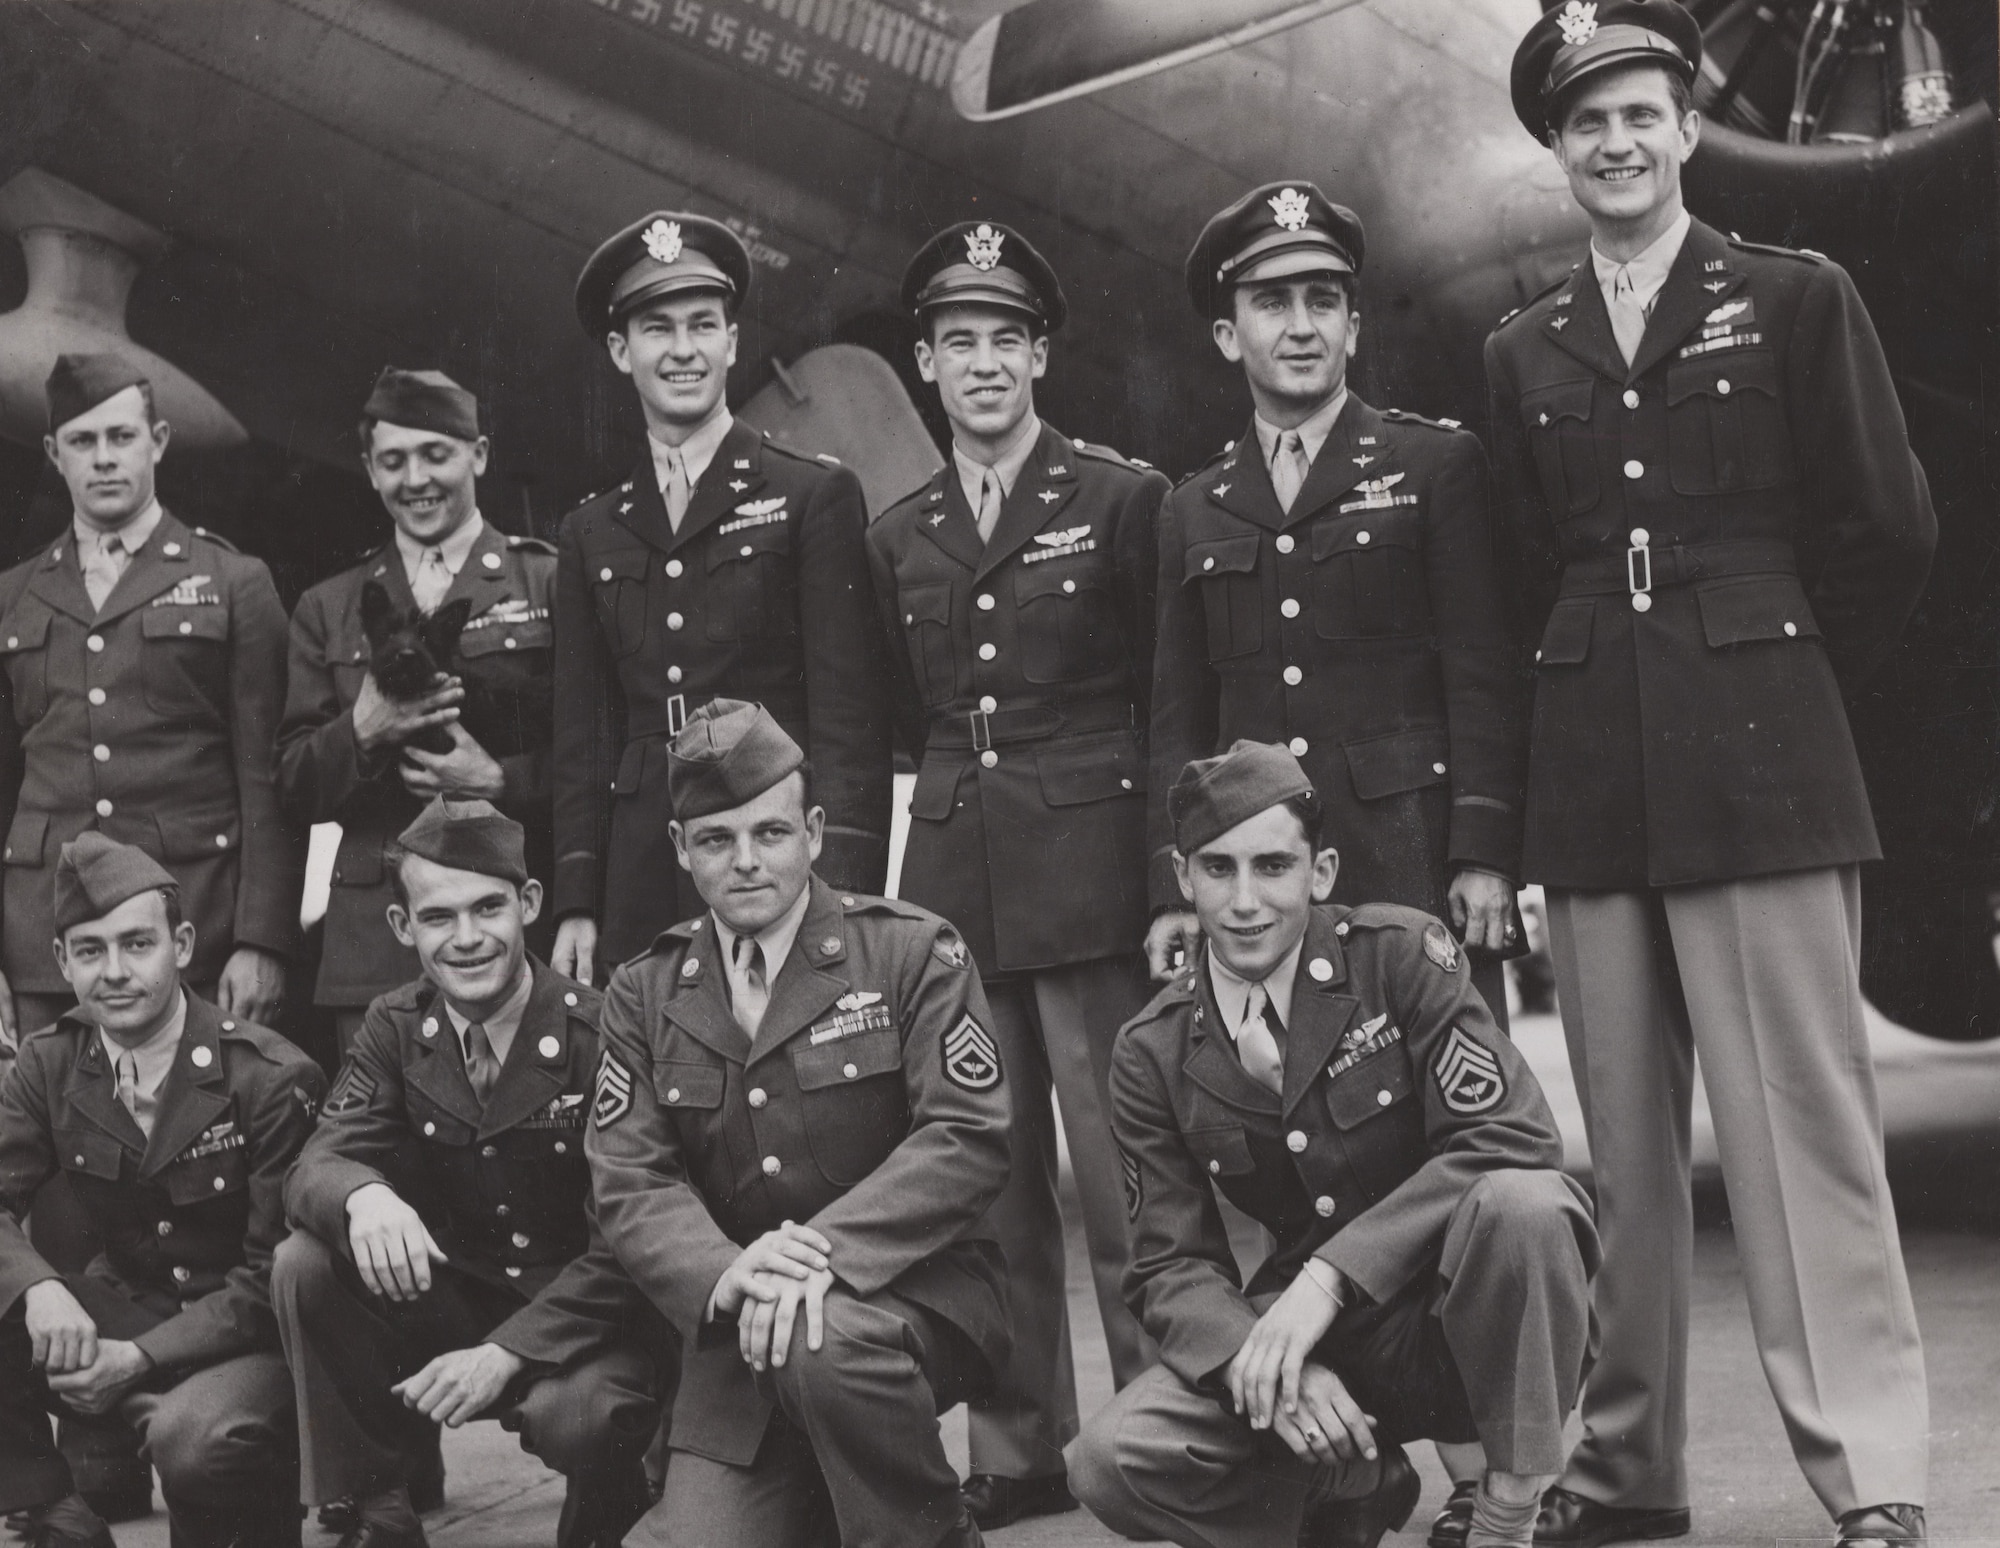 Memphis Belle crew for the war bond tour.  Nine of the ten crewmembers are in the early tour photo above—19-year-old SSgt Casimer “Tony” Nastal (bottom right) was added for the war bond tour.  Nastal flew 25 missions, but only one on the Memphis Belle.